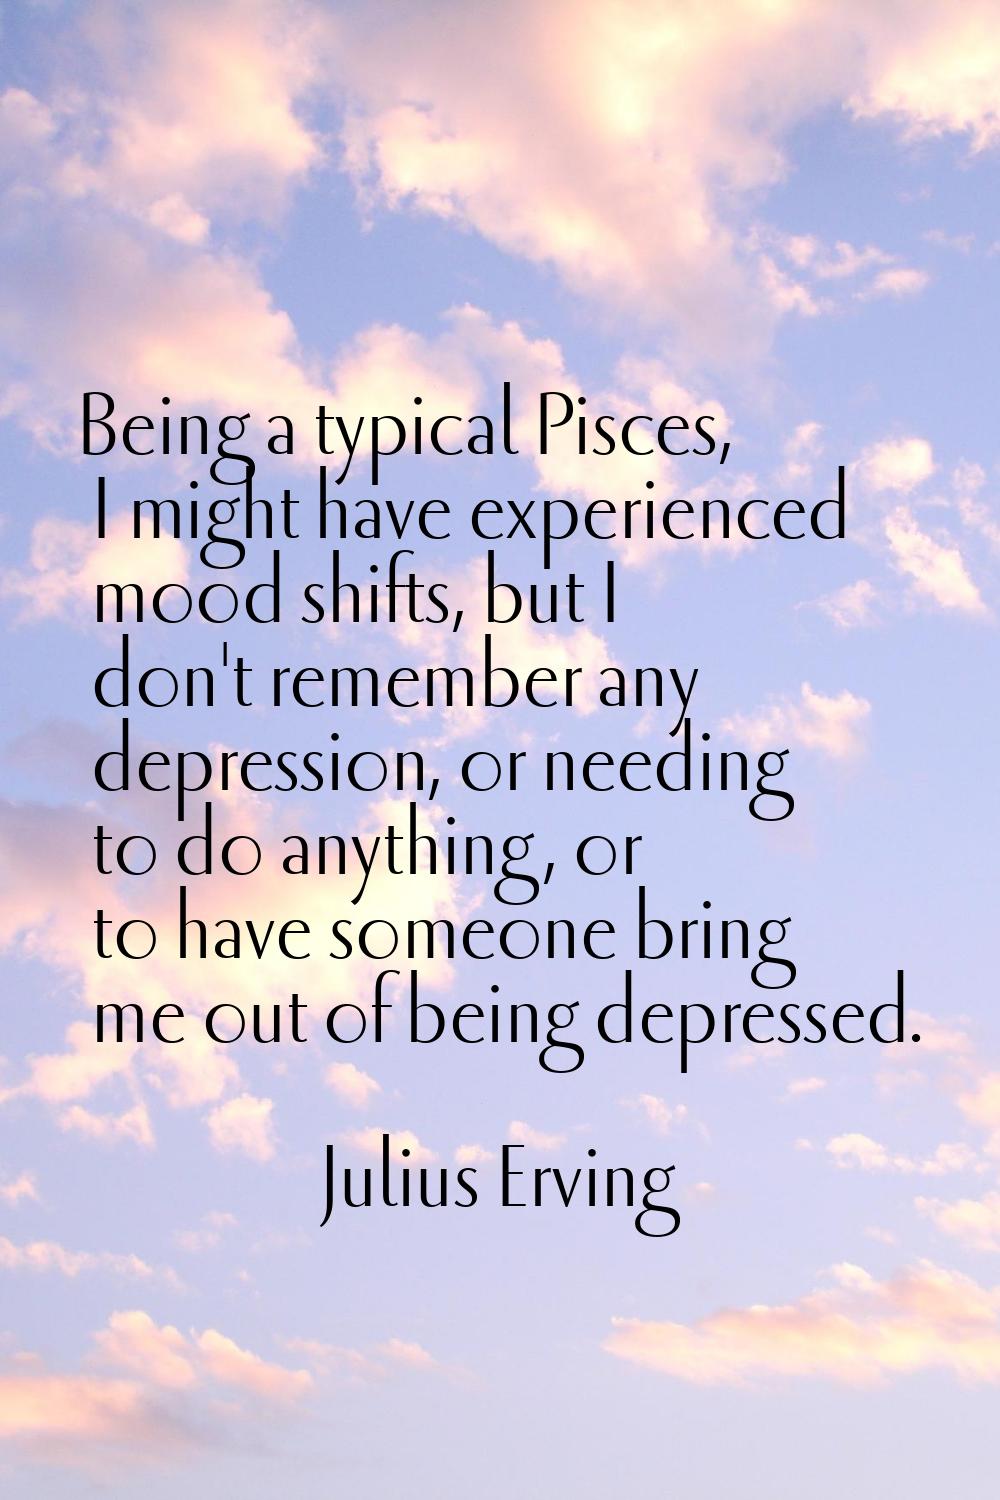 Being a typical Pisces, I might have experienced mood shifts, but I don't remember any depression, 